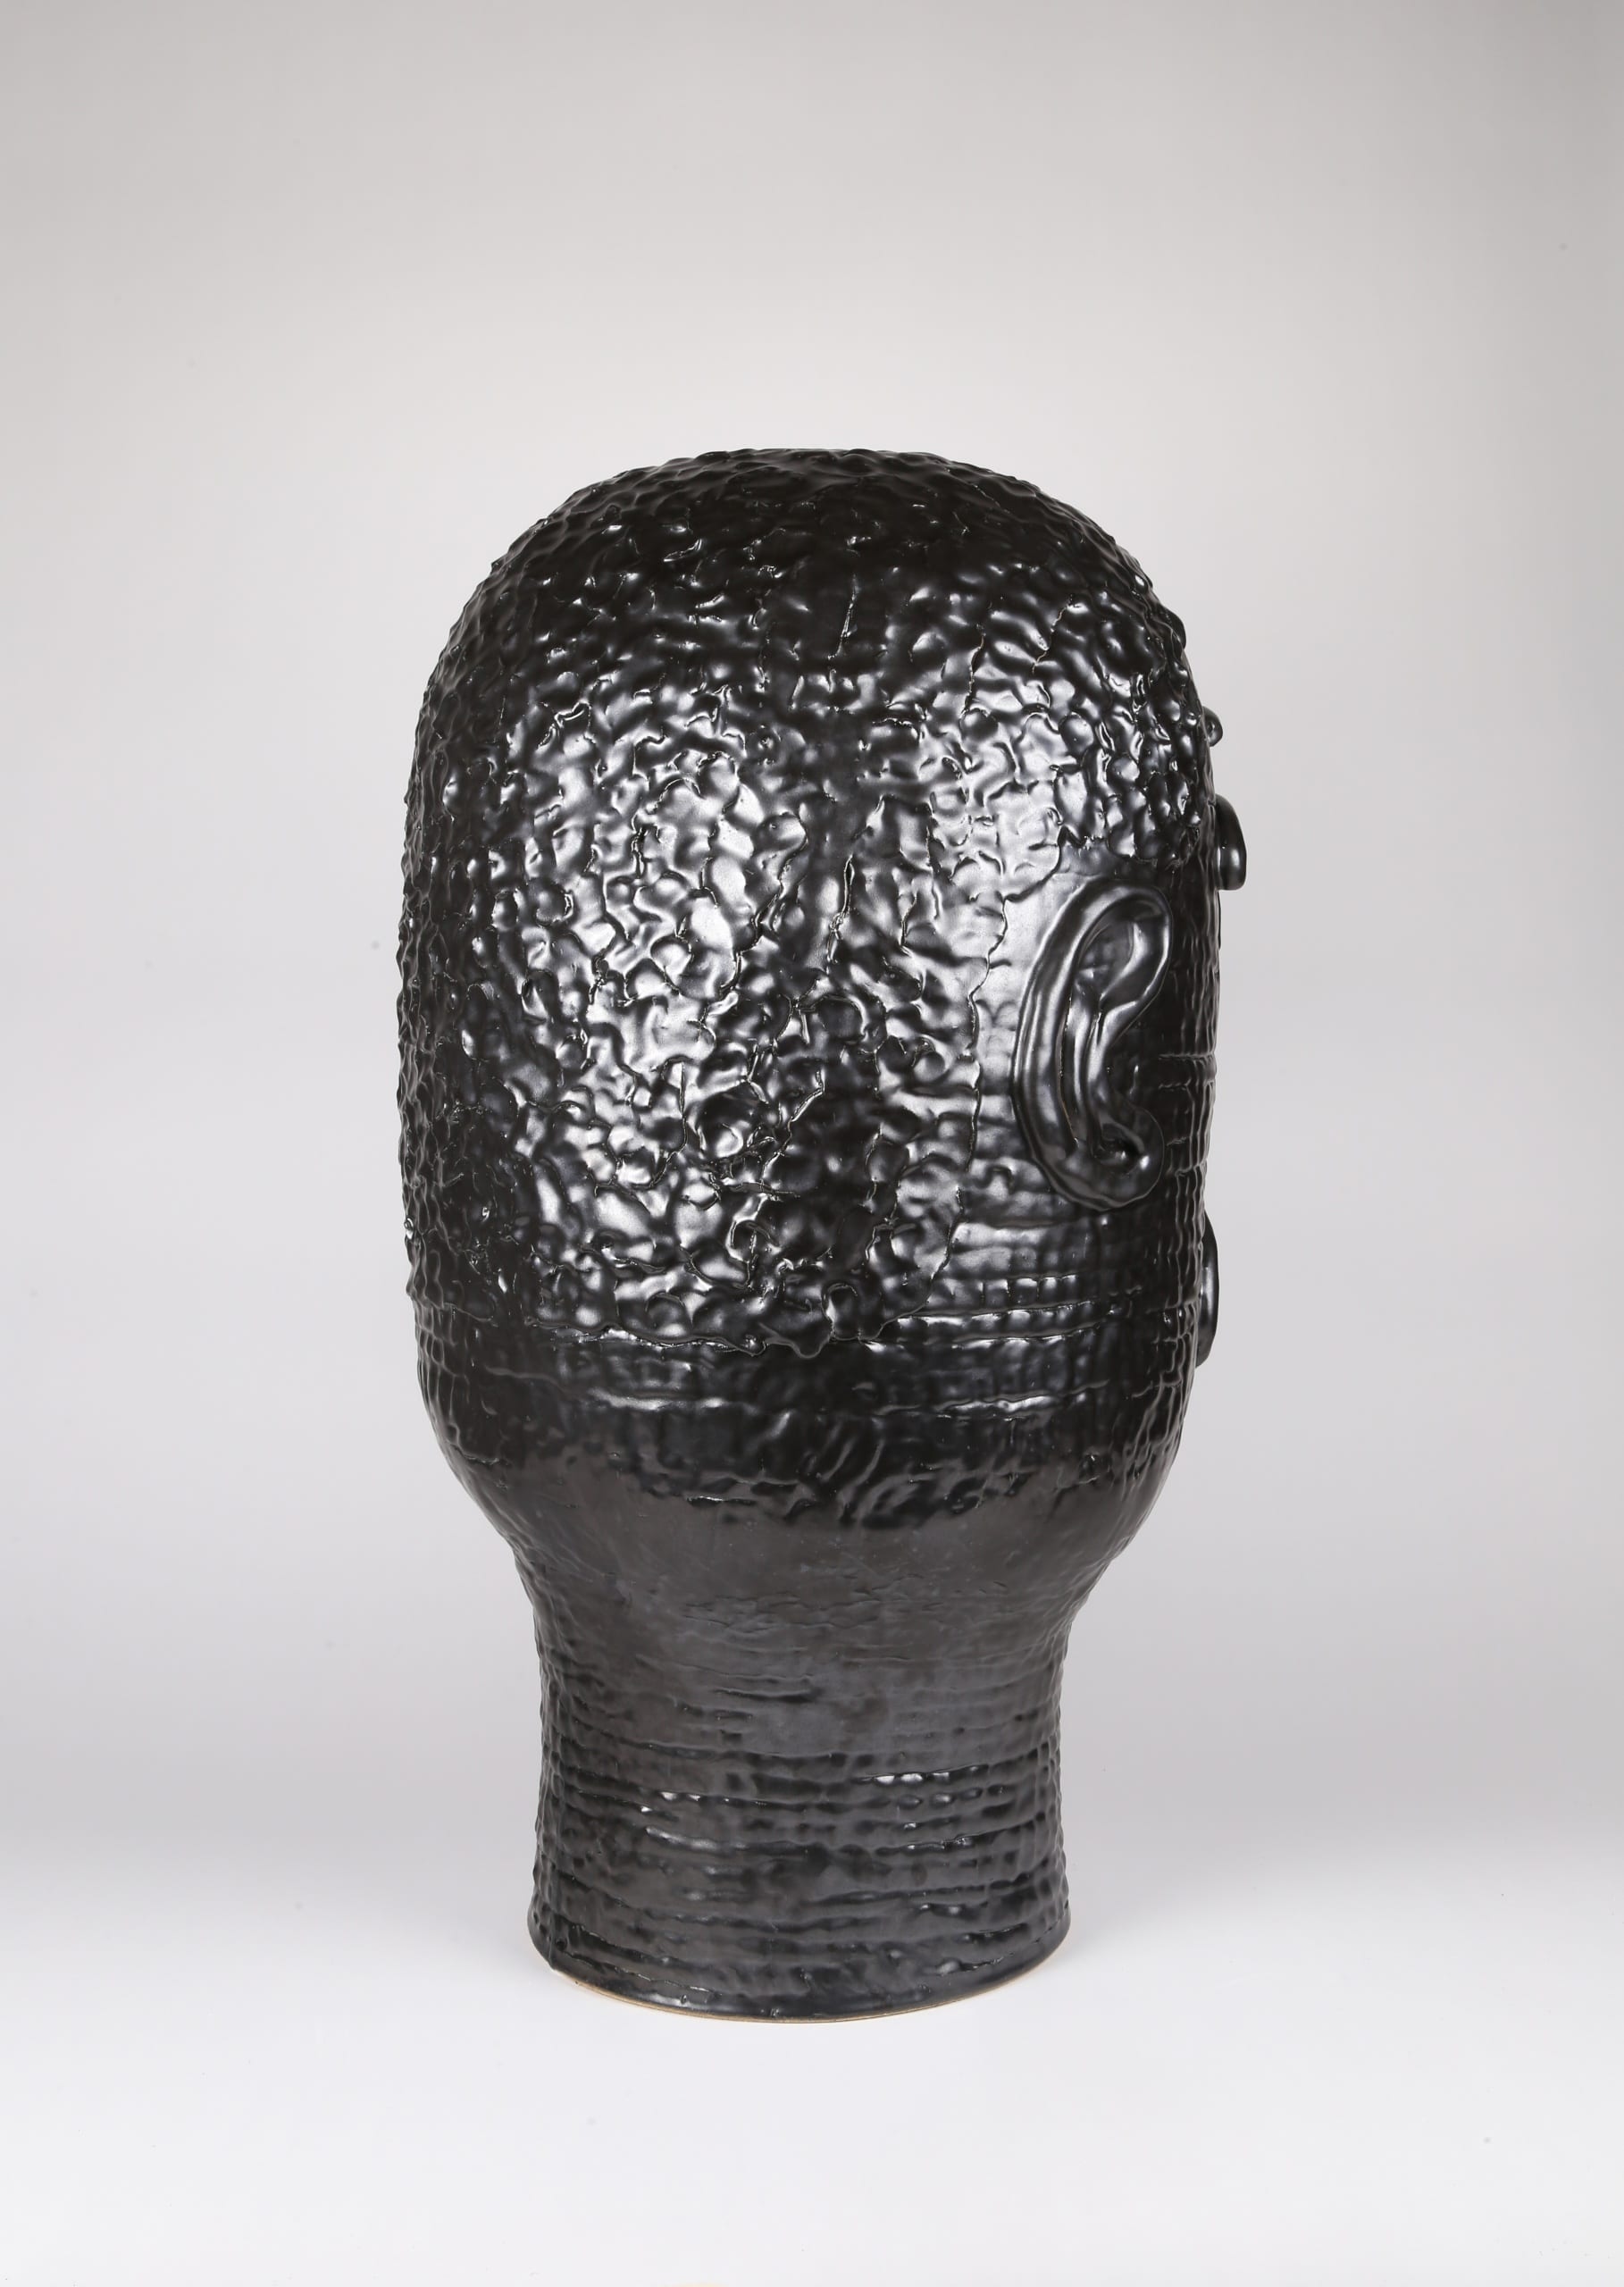 Color photograph with a back view of an abstract ceramic portrait head that appears to be made from a long coil of clay. The rear of the portrait details the texture of the figure's short cropped hair. The object is monochromatic (black), with a slight sheen to the glaze.